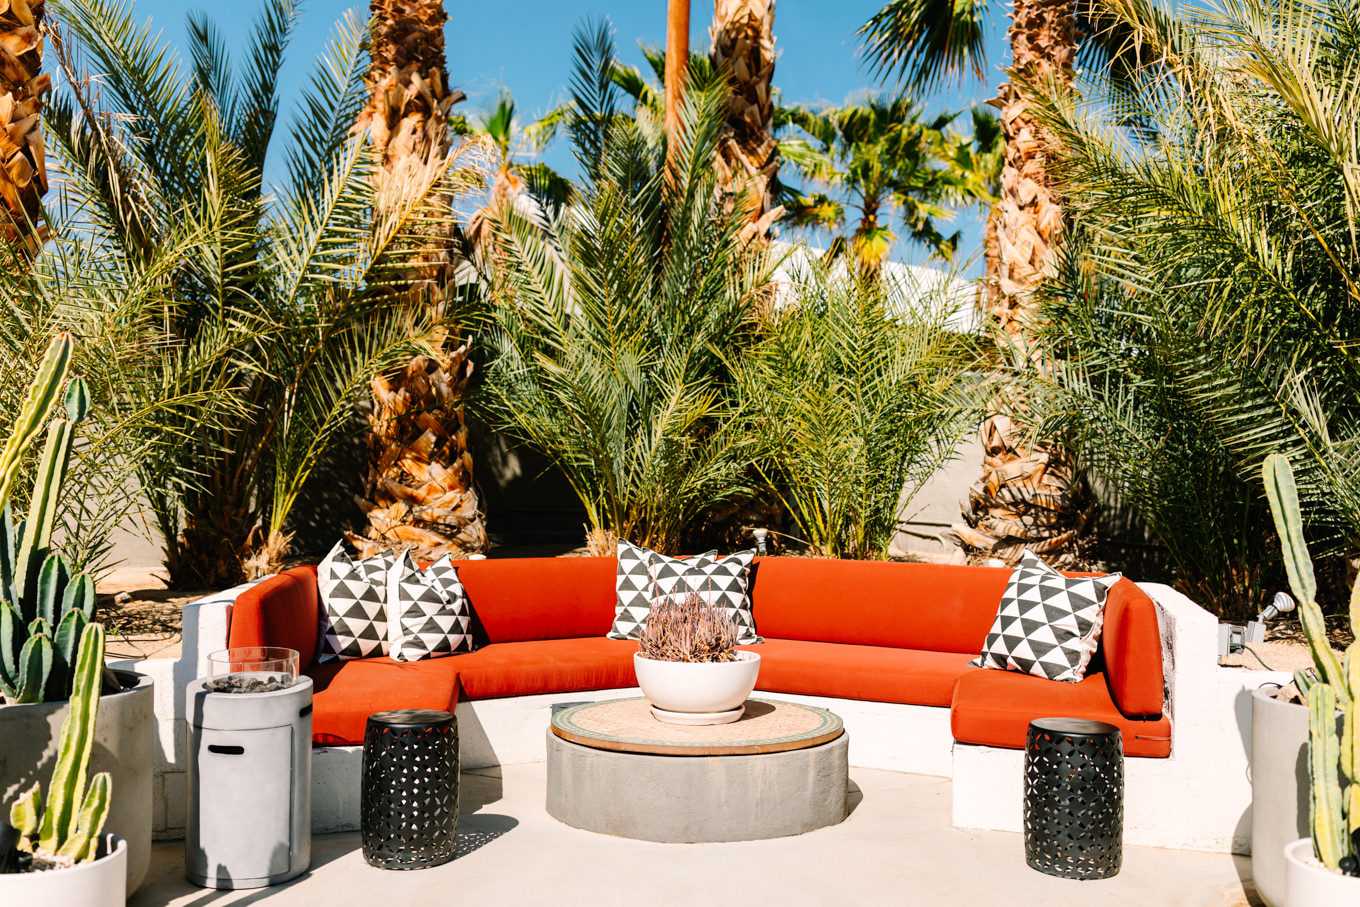 Orange lounge setup at Lautner Compound | Pink and orange Lautner Compound wedding | Colorful Palm Springs wedding photography | #palmspringsphotographer #palmspringswedding #lautnercompound #southerncaliforniawedding  Source: Mary Costa Photography | Los Angeles